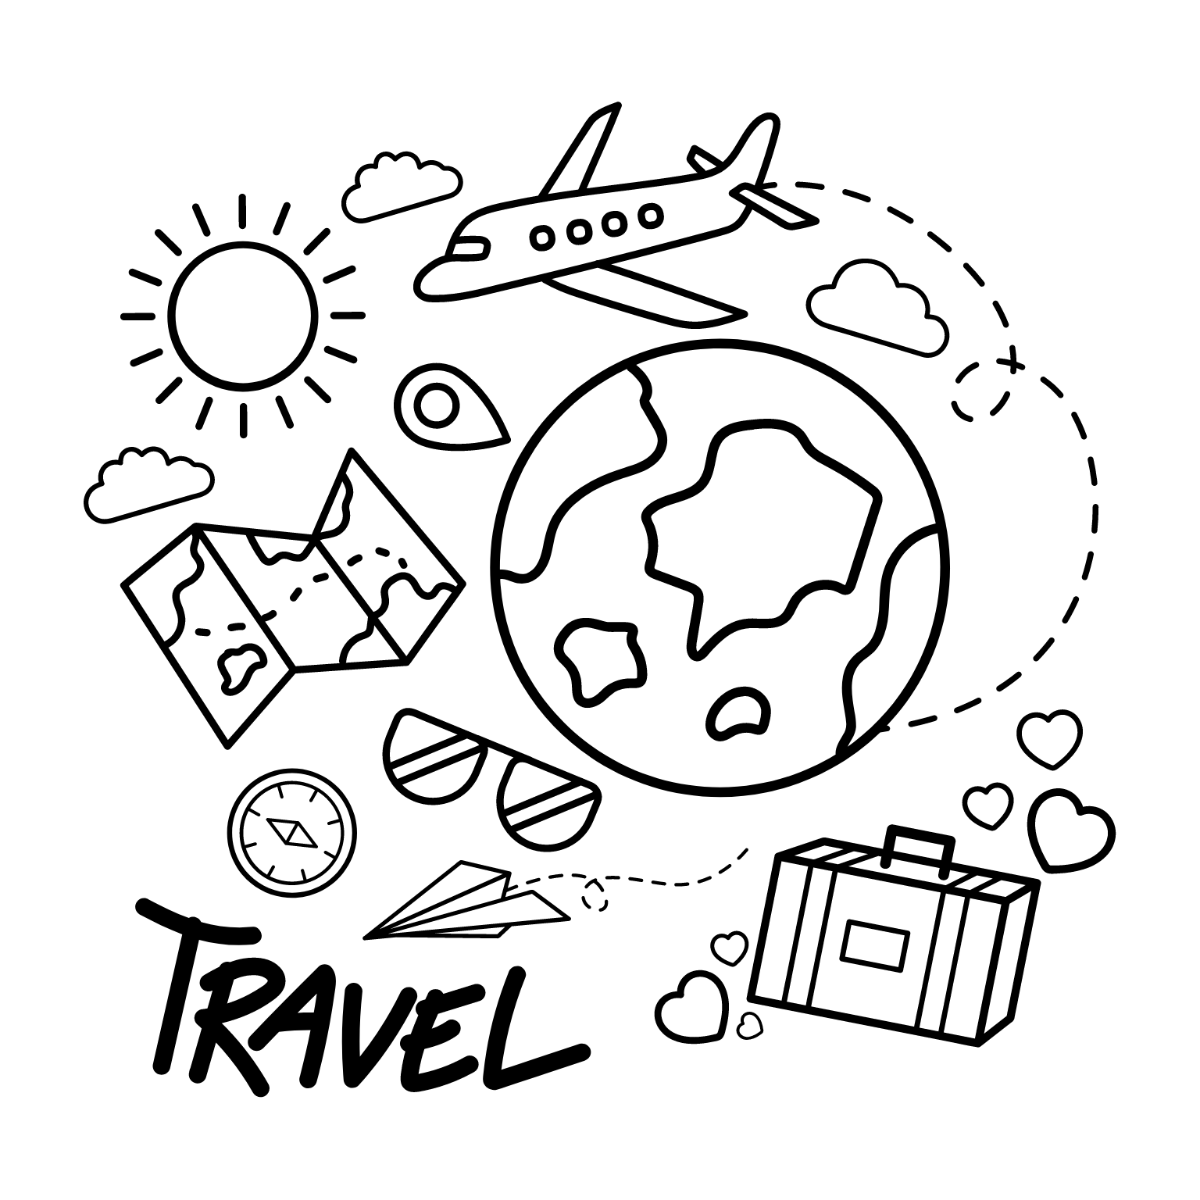 Travel Doodle Vector Template